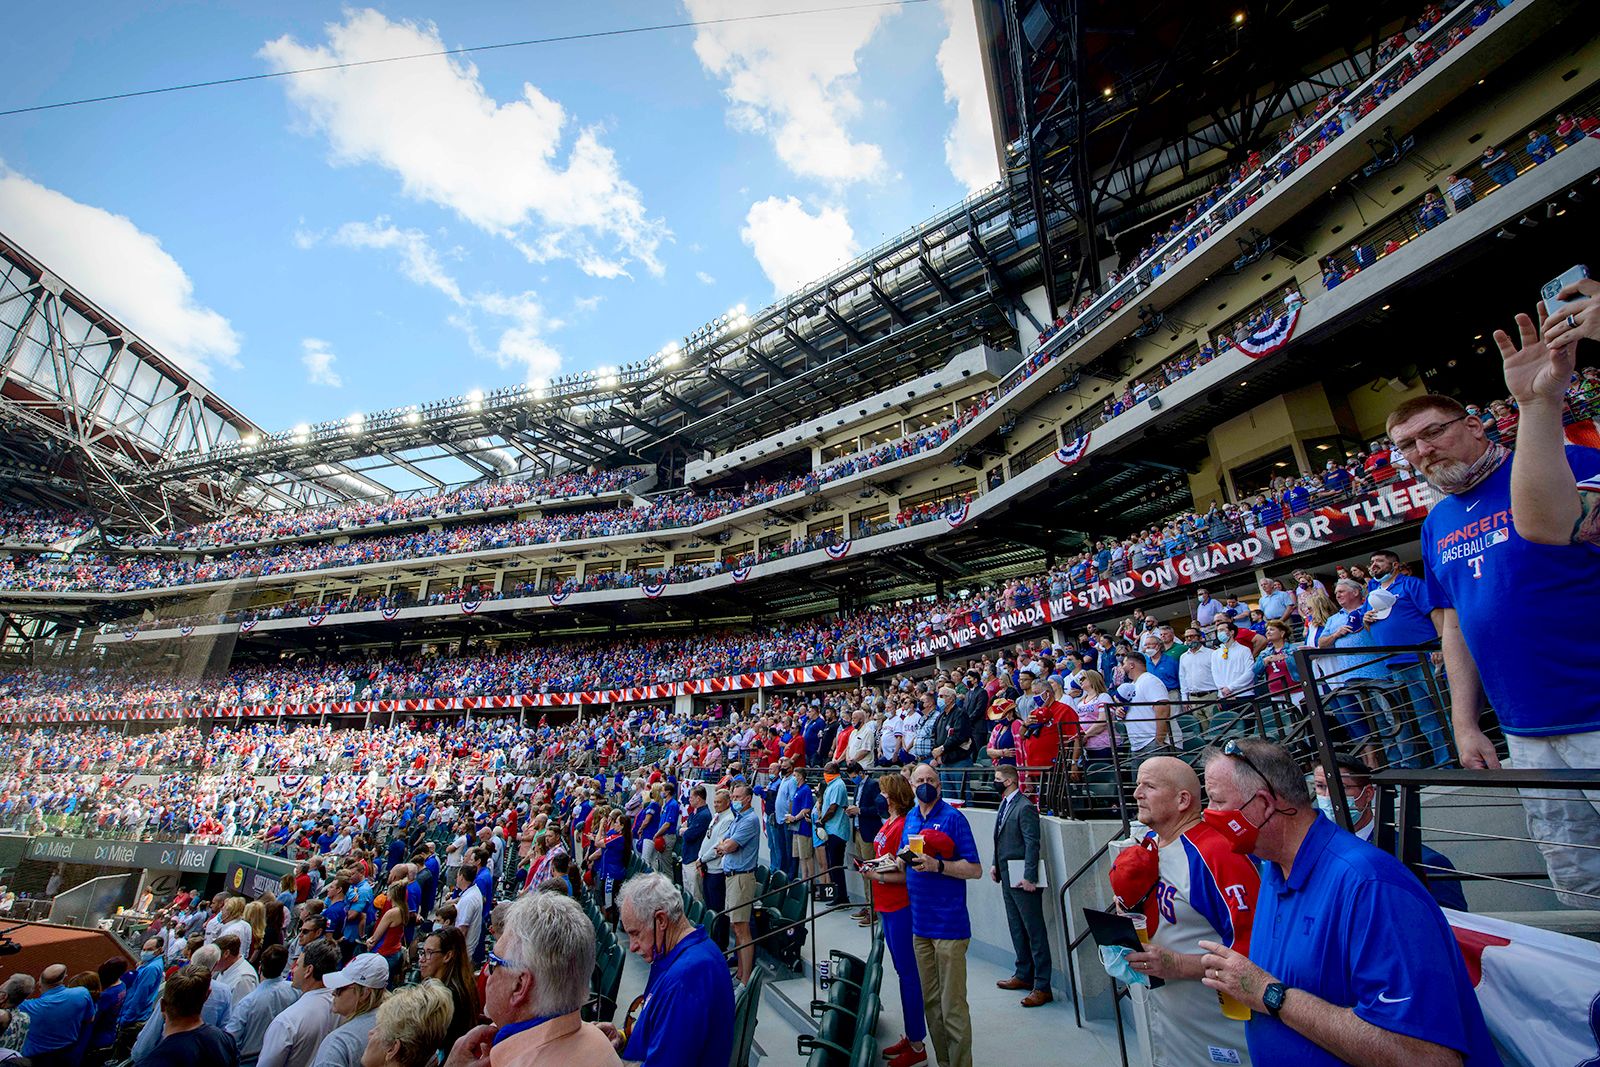 Texas Rangers sell over 38,000 tickets to home opener, marking one